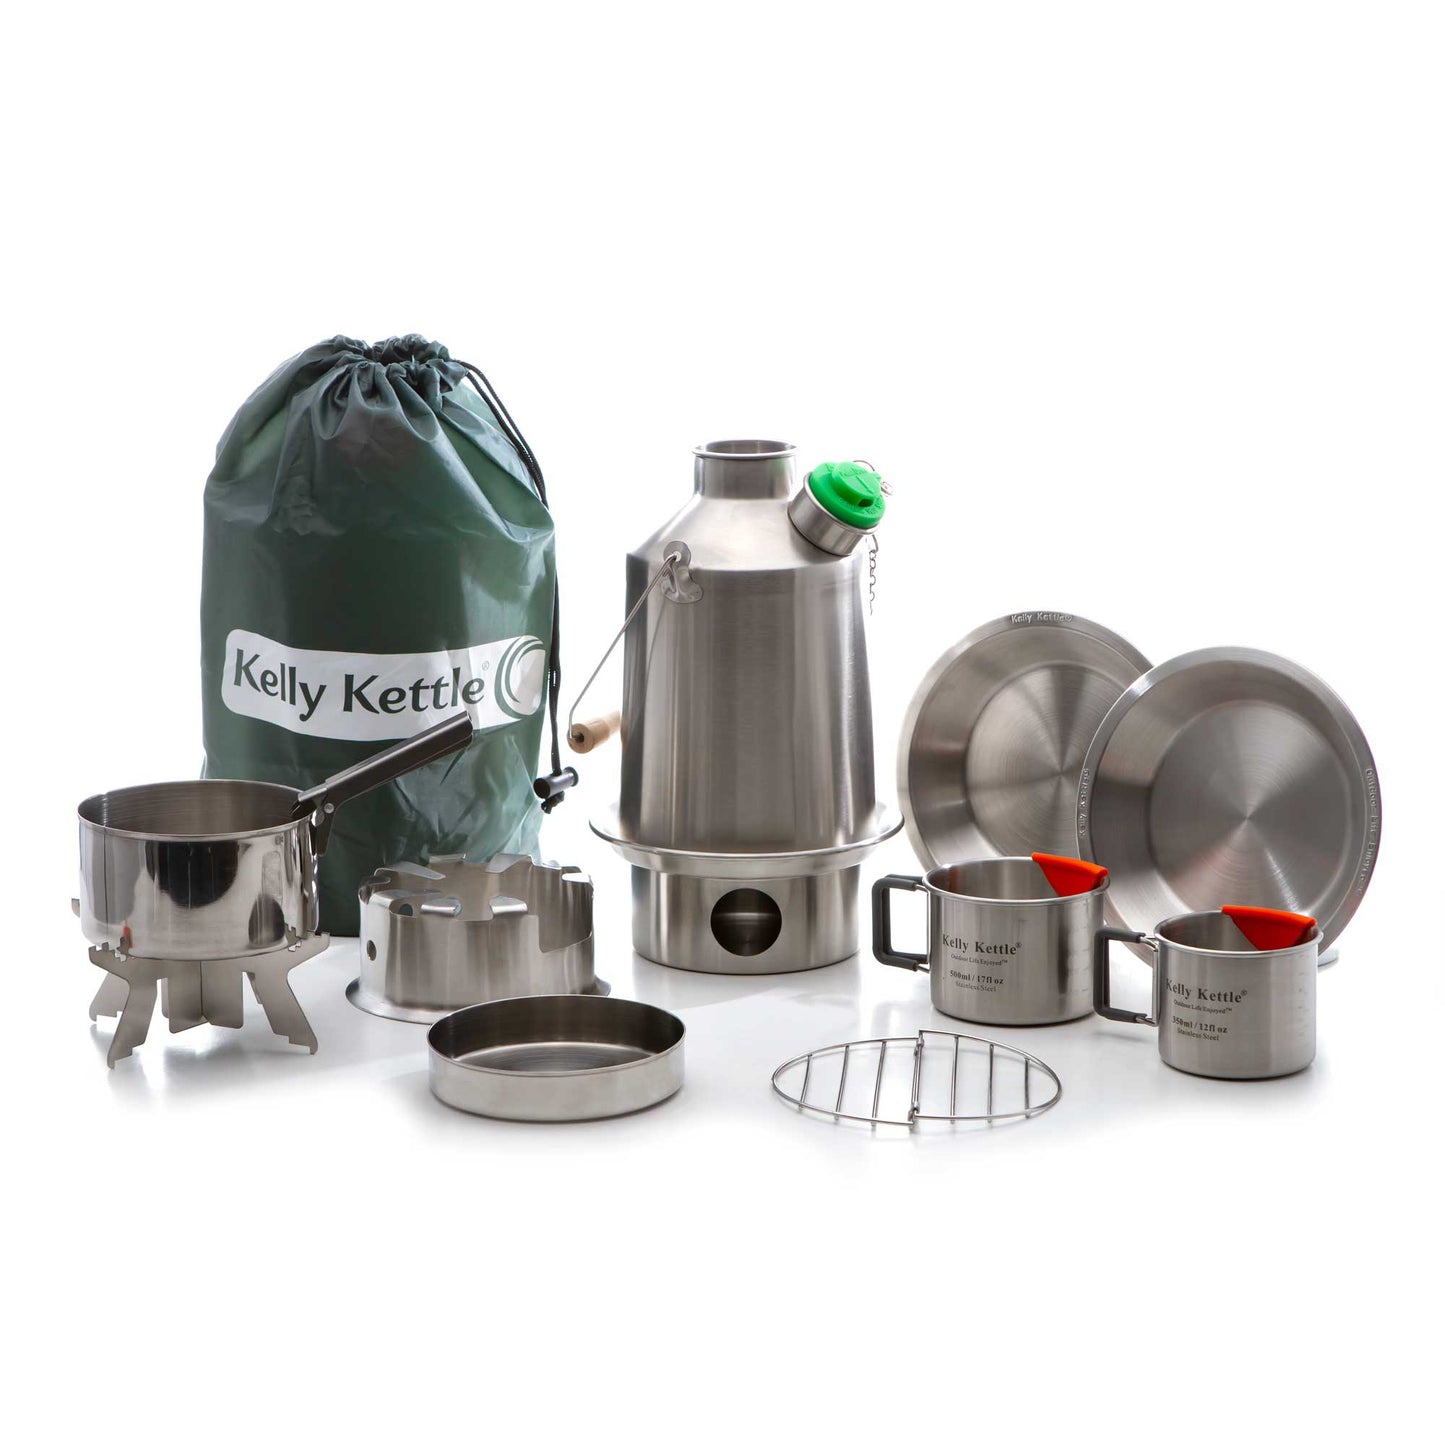 KELLY KETTLE® ULTIMATE STAINLESS STEEL SCOUT KIT